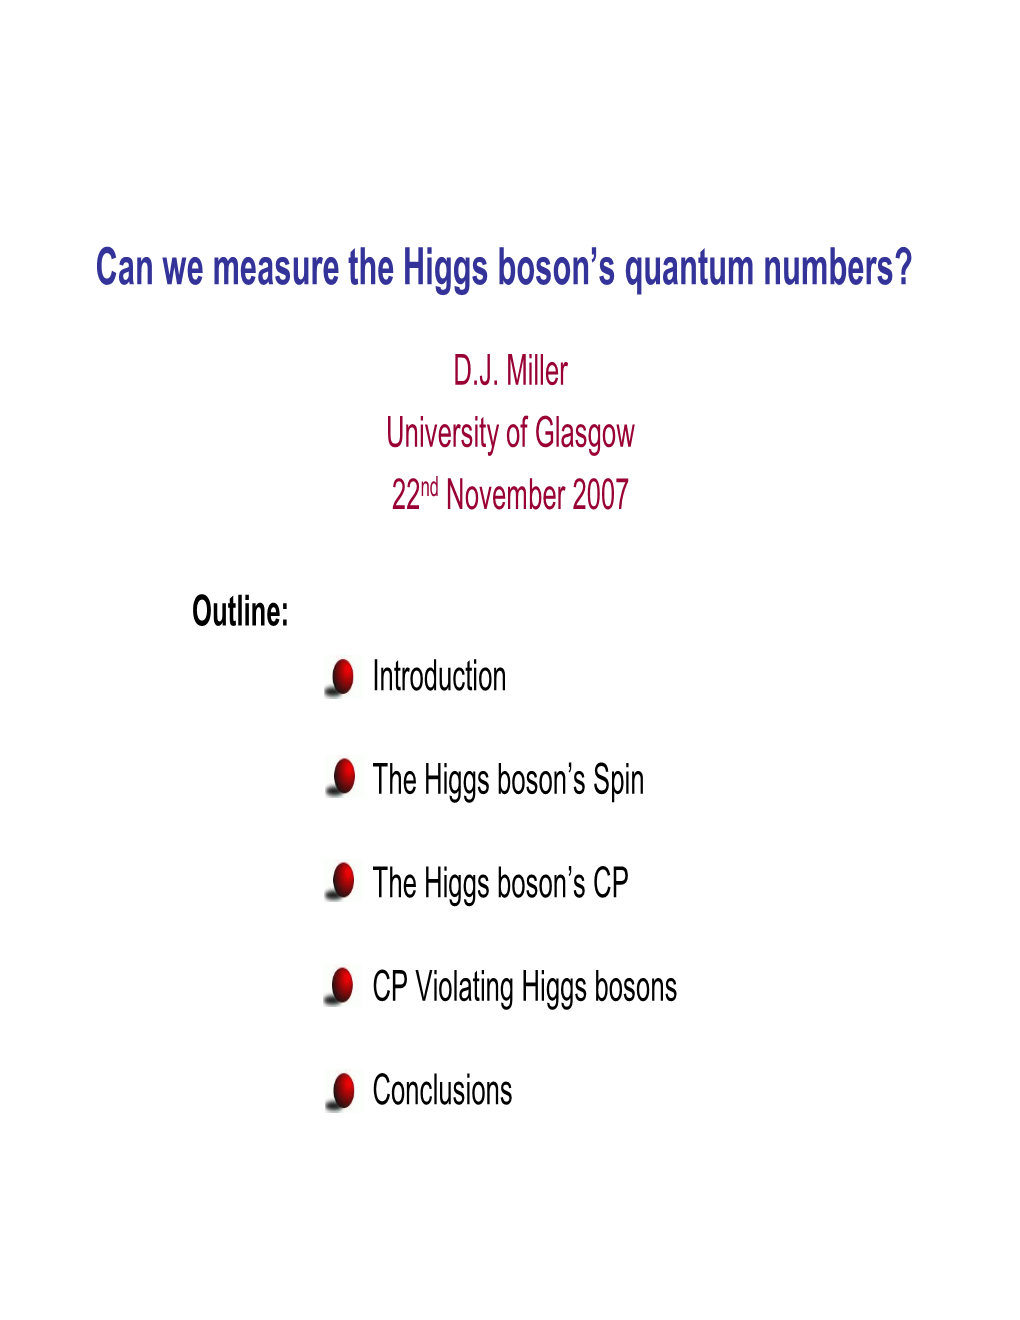 Can We Measure the Higgs Boson's Quantum Numbers?